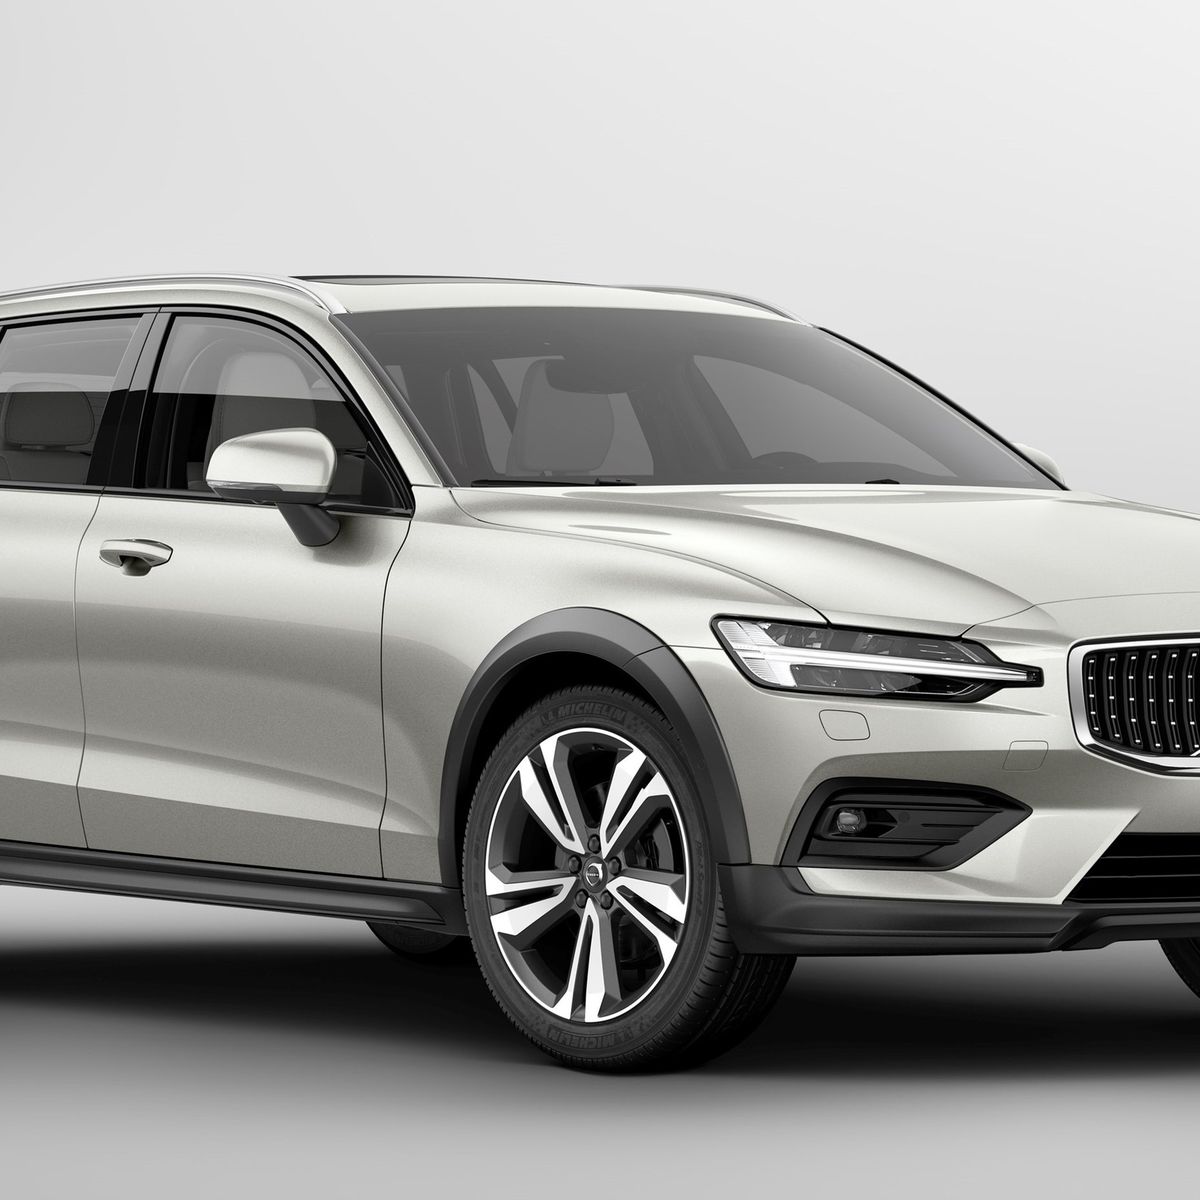 2020 Volvo V60 Cross Country first drive: Roof height matters